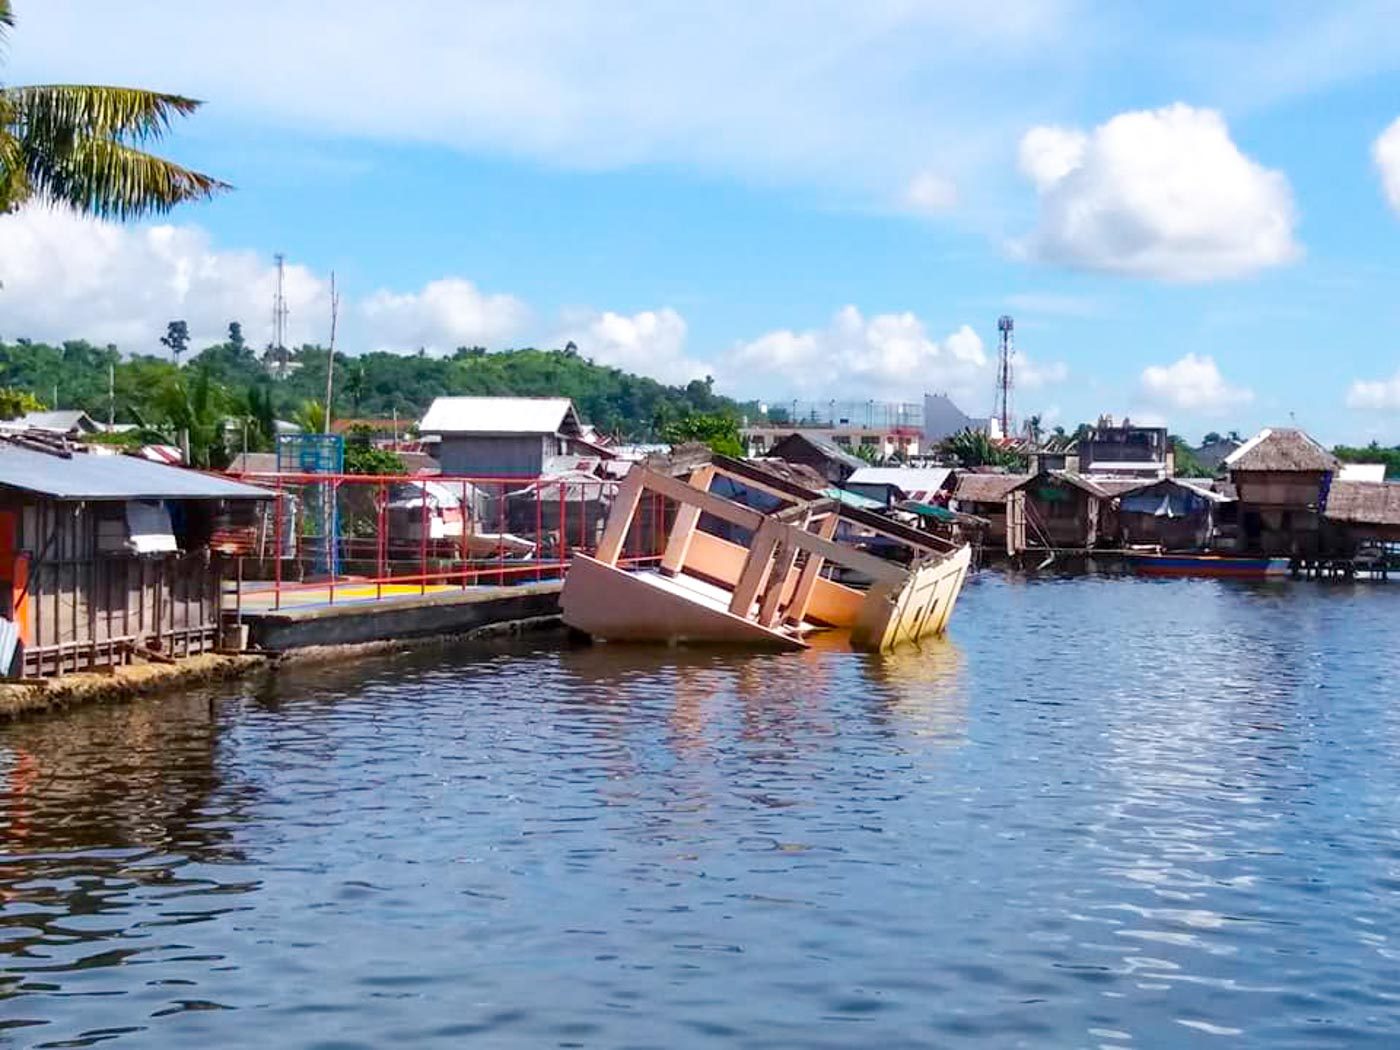 REMINDER. Local authorities won't remove the vessel that was stranded during Super Typhoon Yolanda, to remind residents of how the community survived and rebuilt. Photo by Jazmin Bonifacio/Rappler 